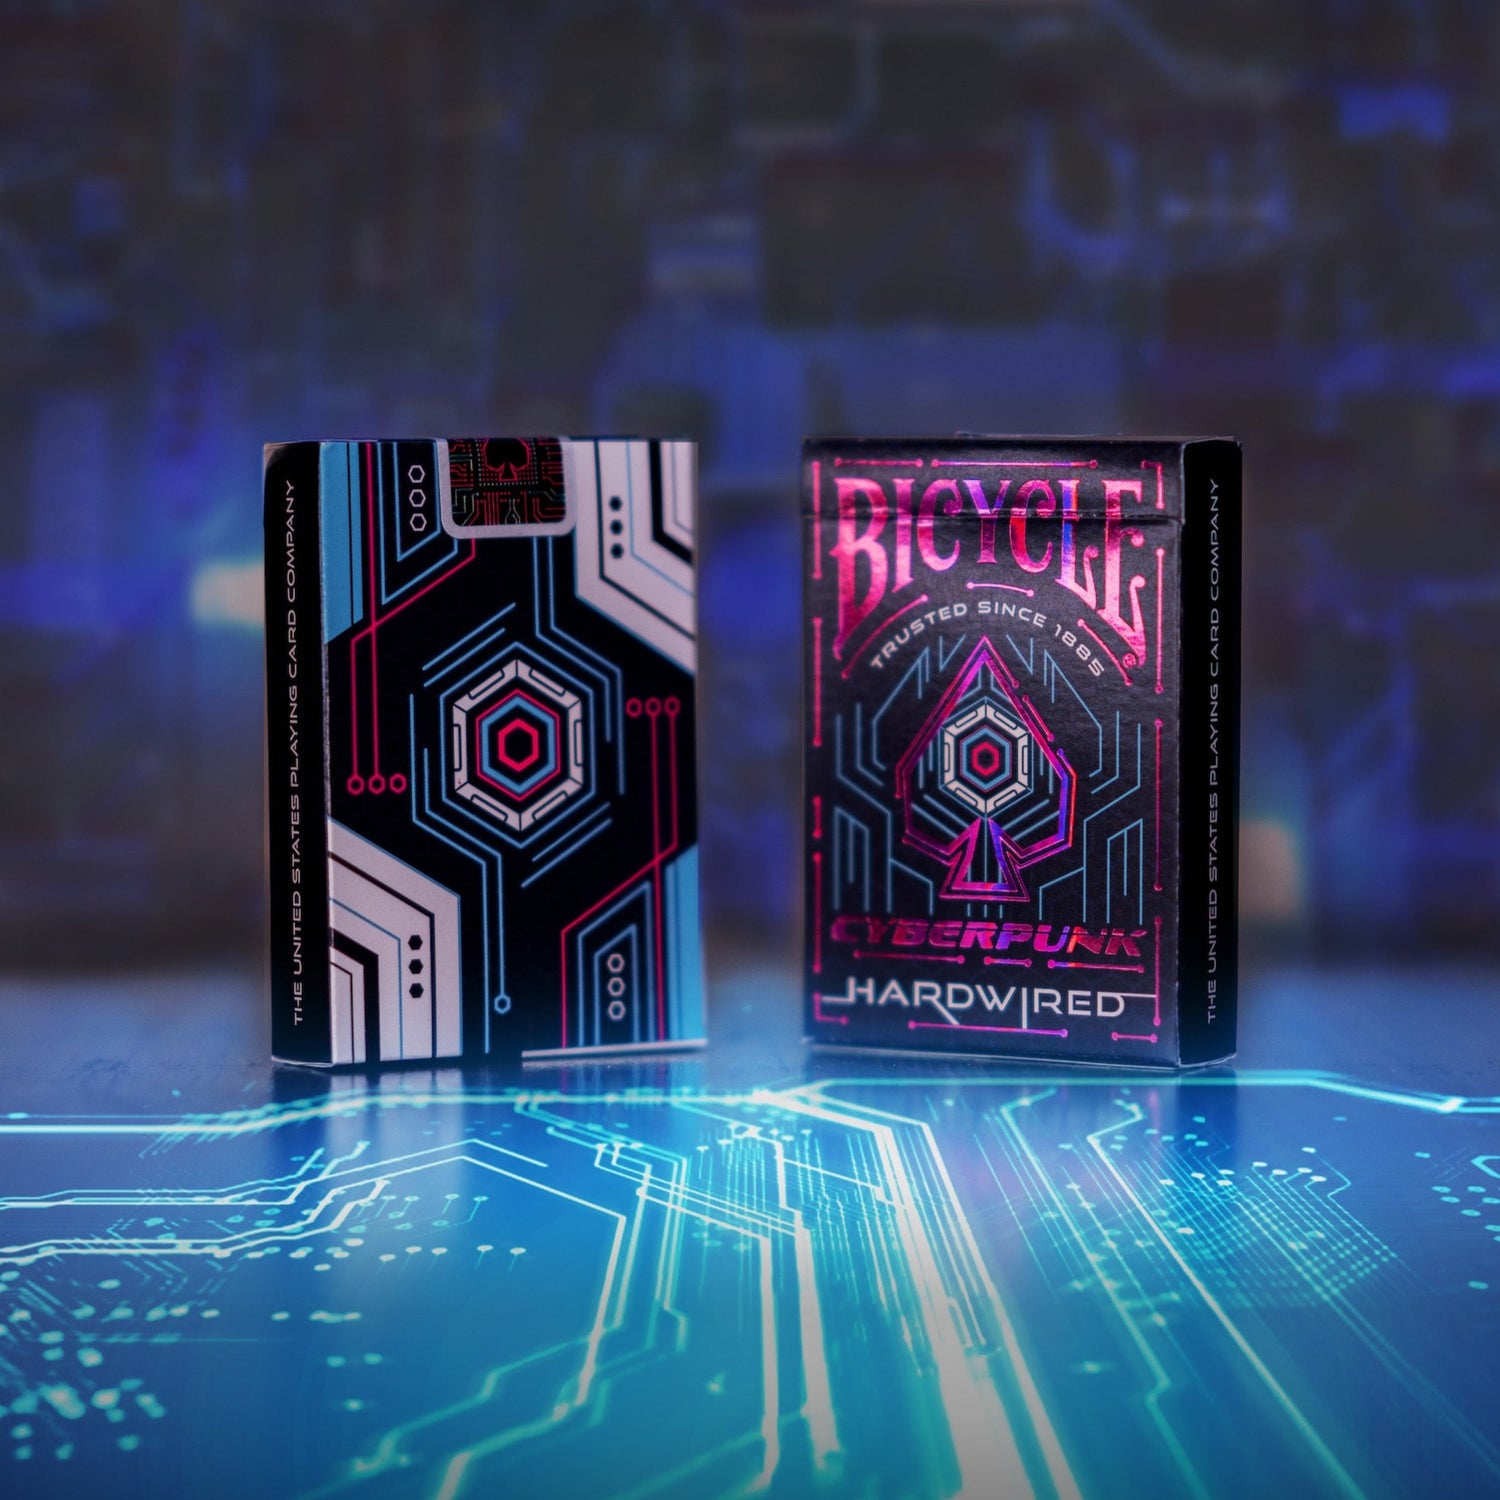 Bicycle Cyberpunk Cybercity Hardwired Cybernetic Playing Cards